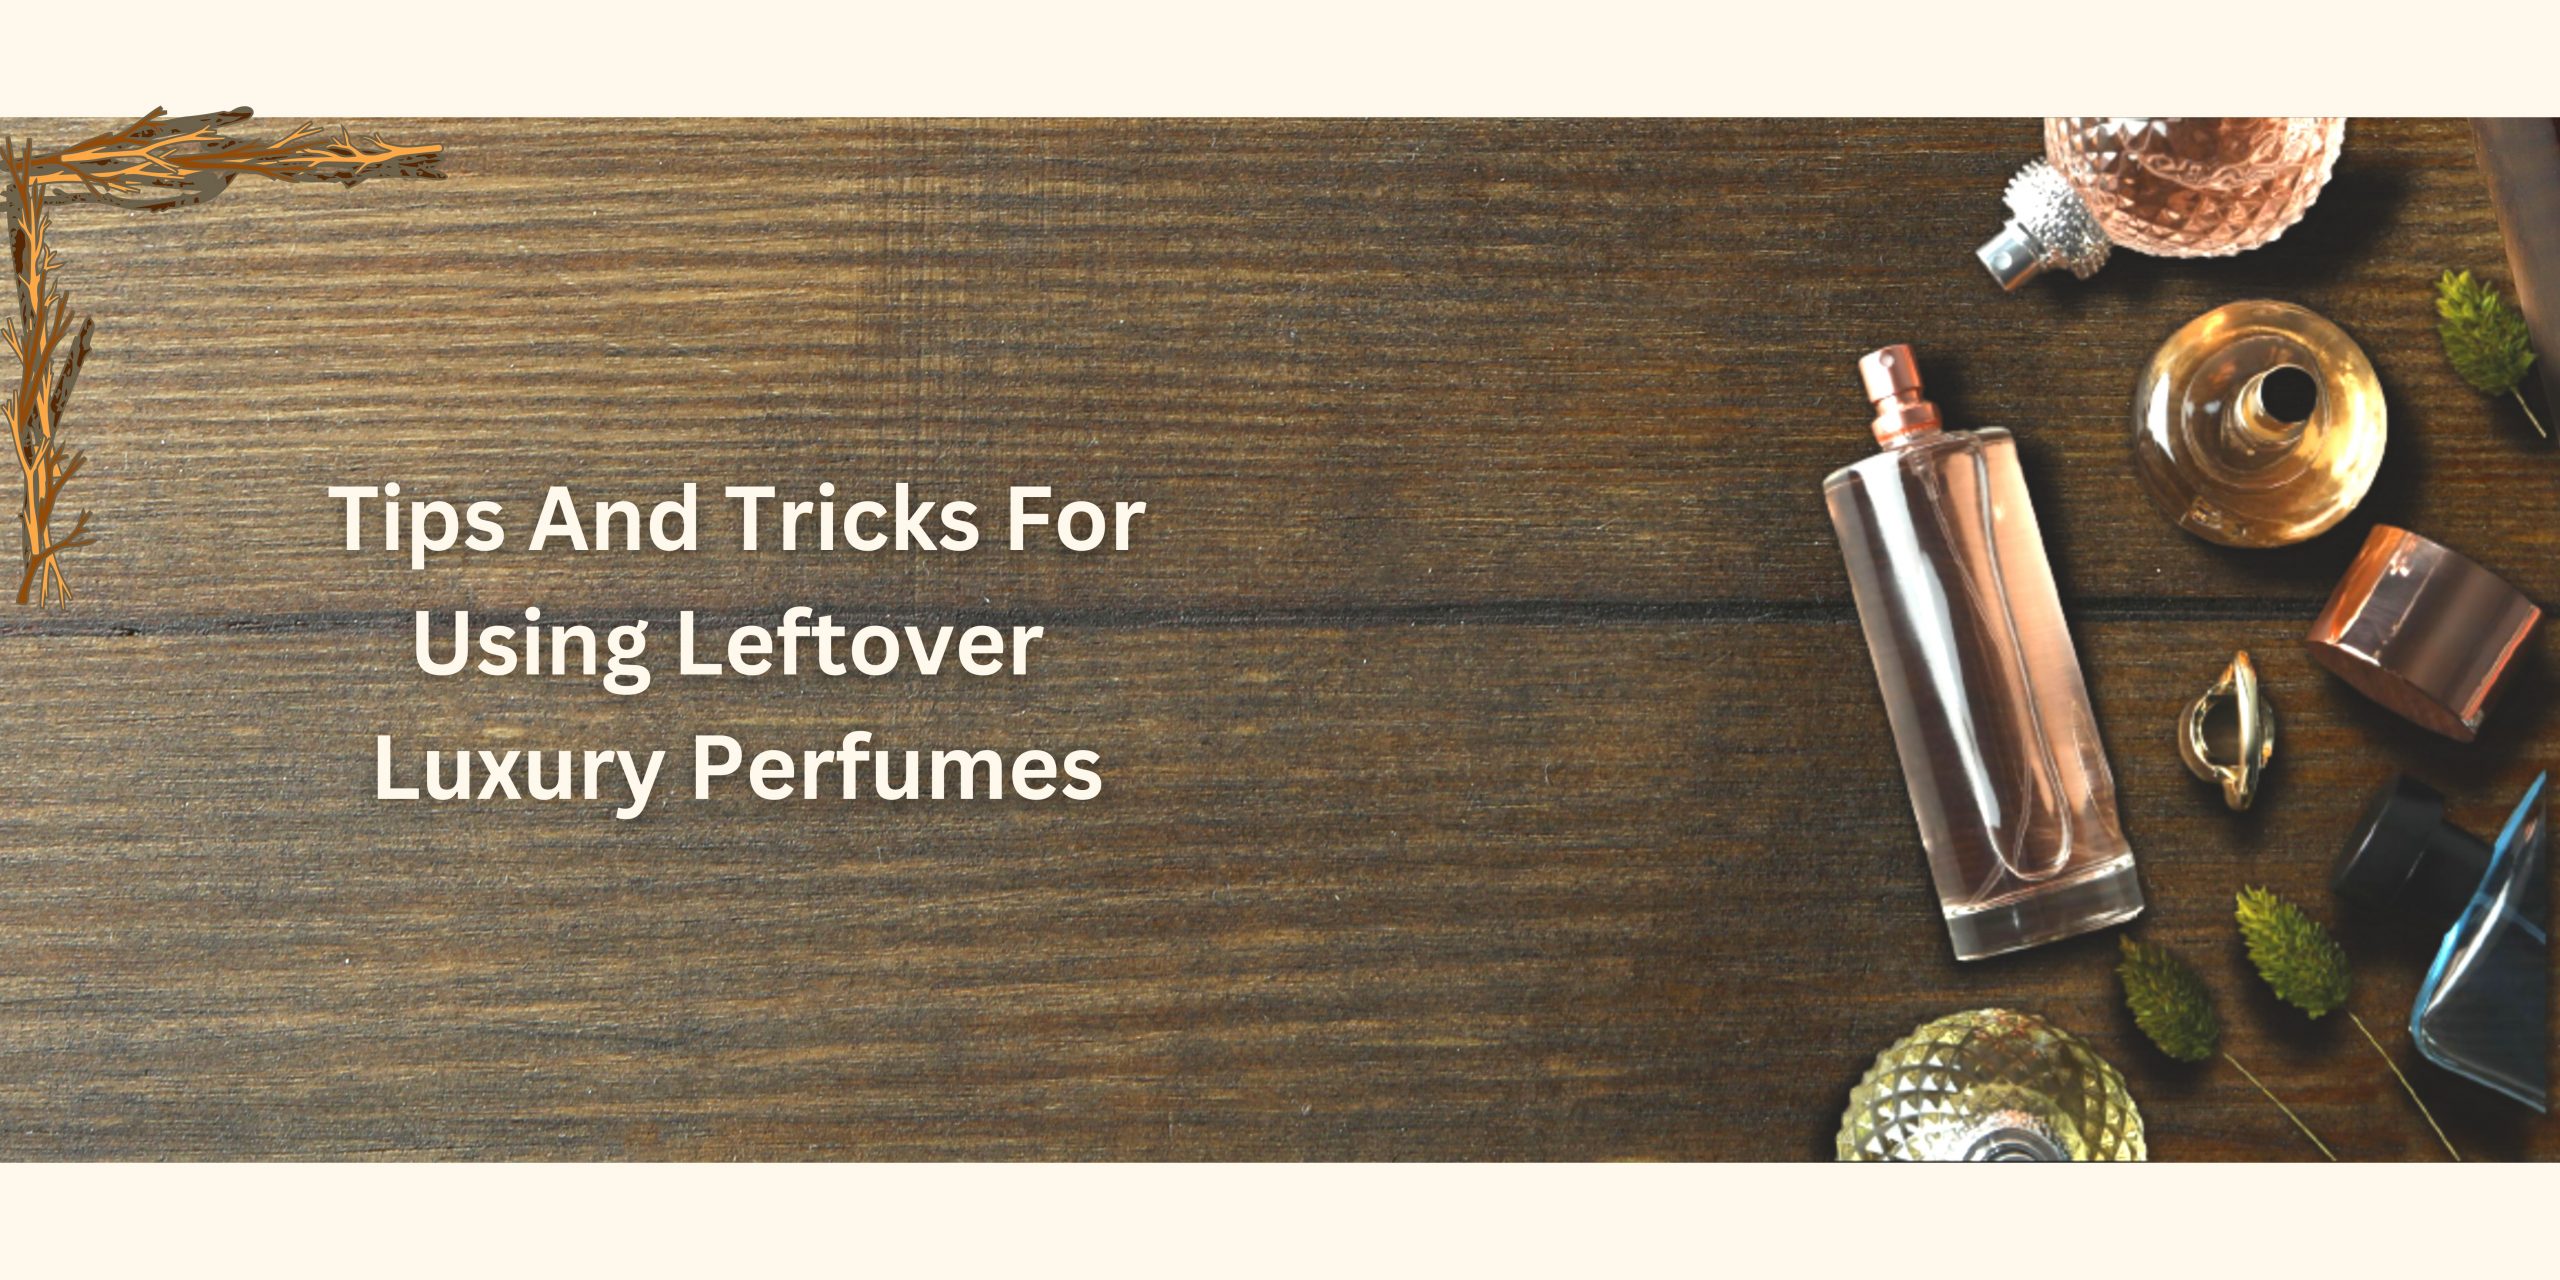 Tips And Tricks For Using Leftover Luxury Perfumes (1)